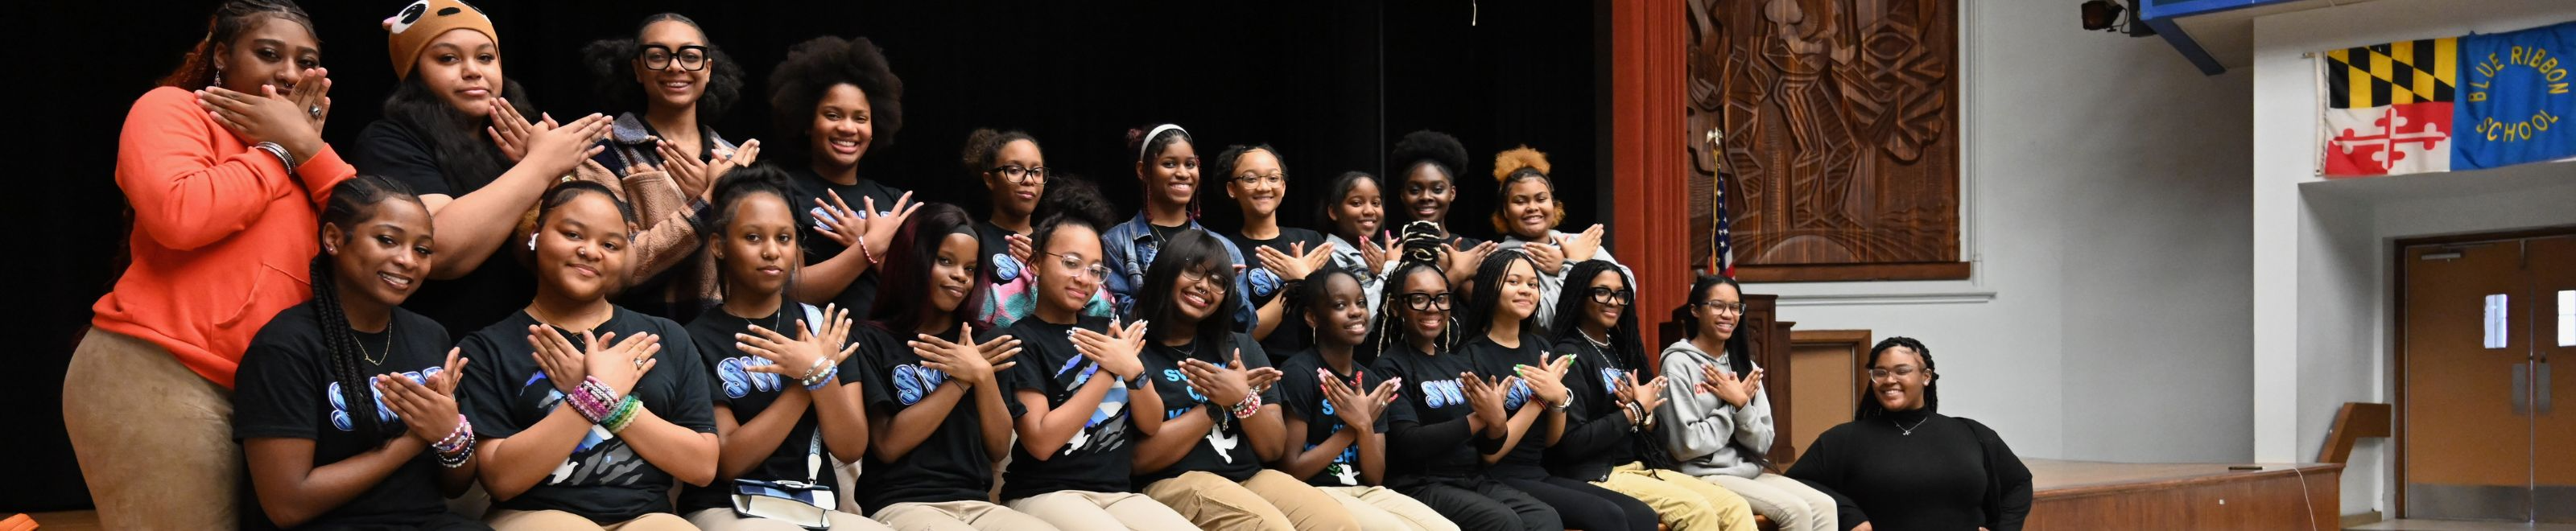 Baltimore City College SWTT Step team poses for a group picture